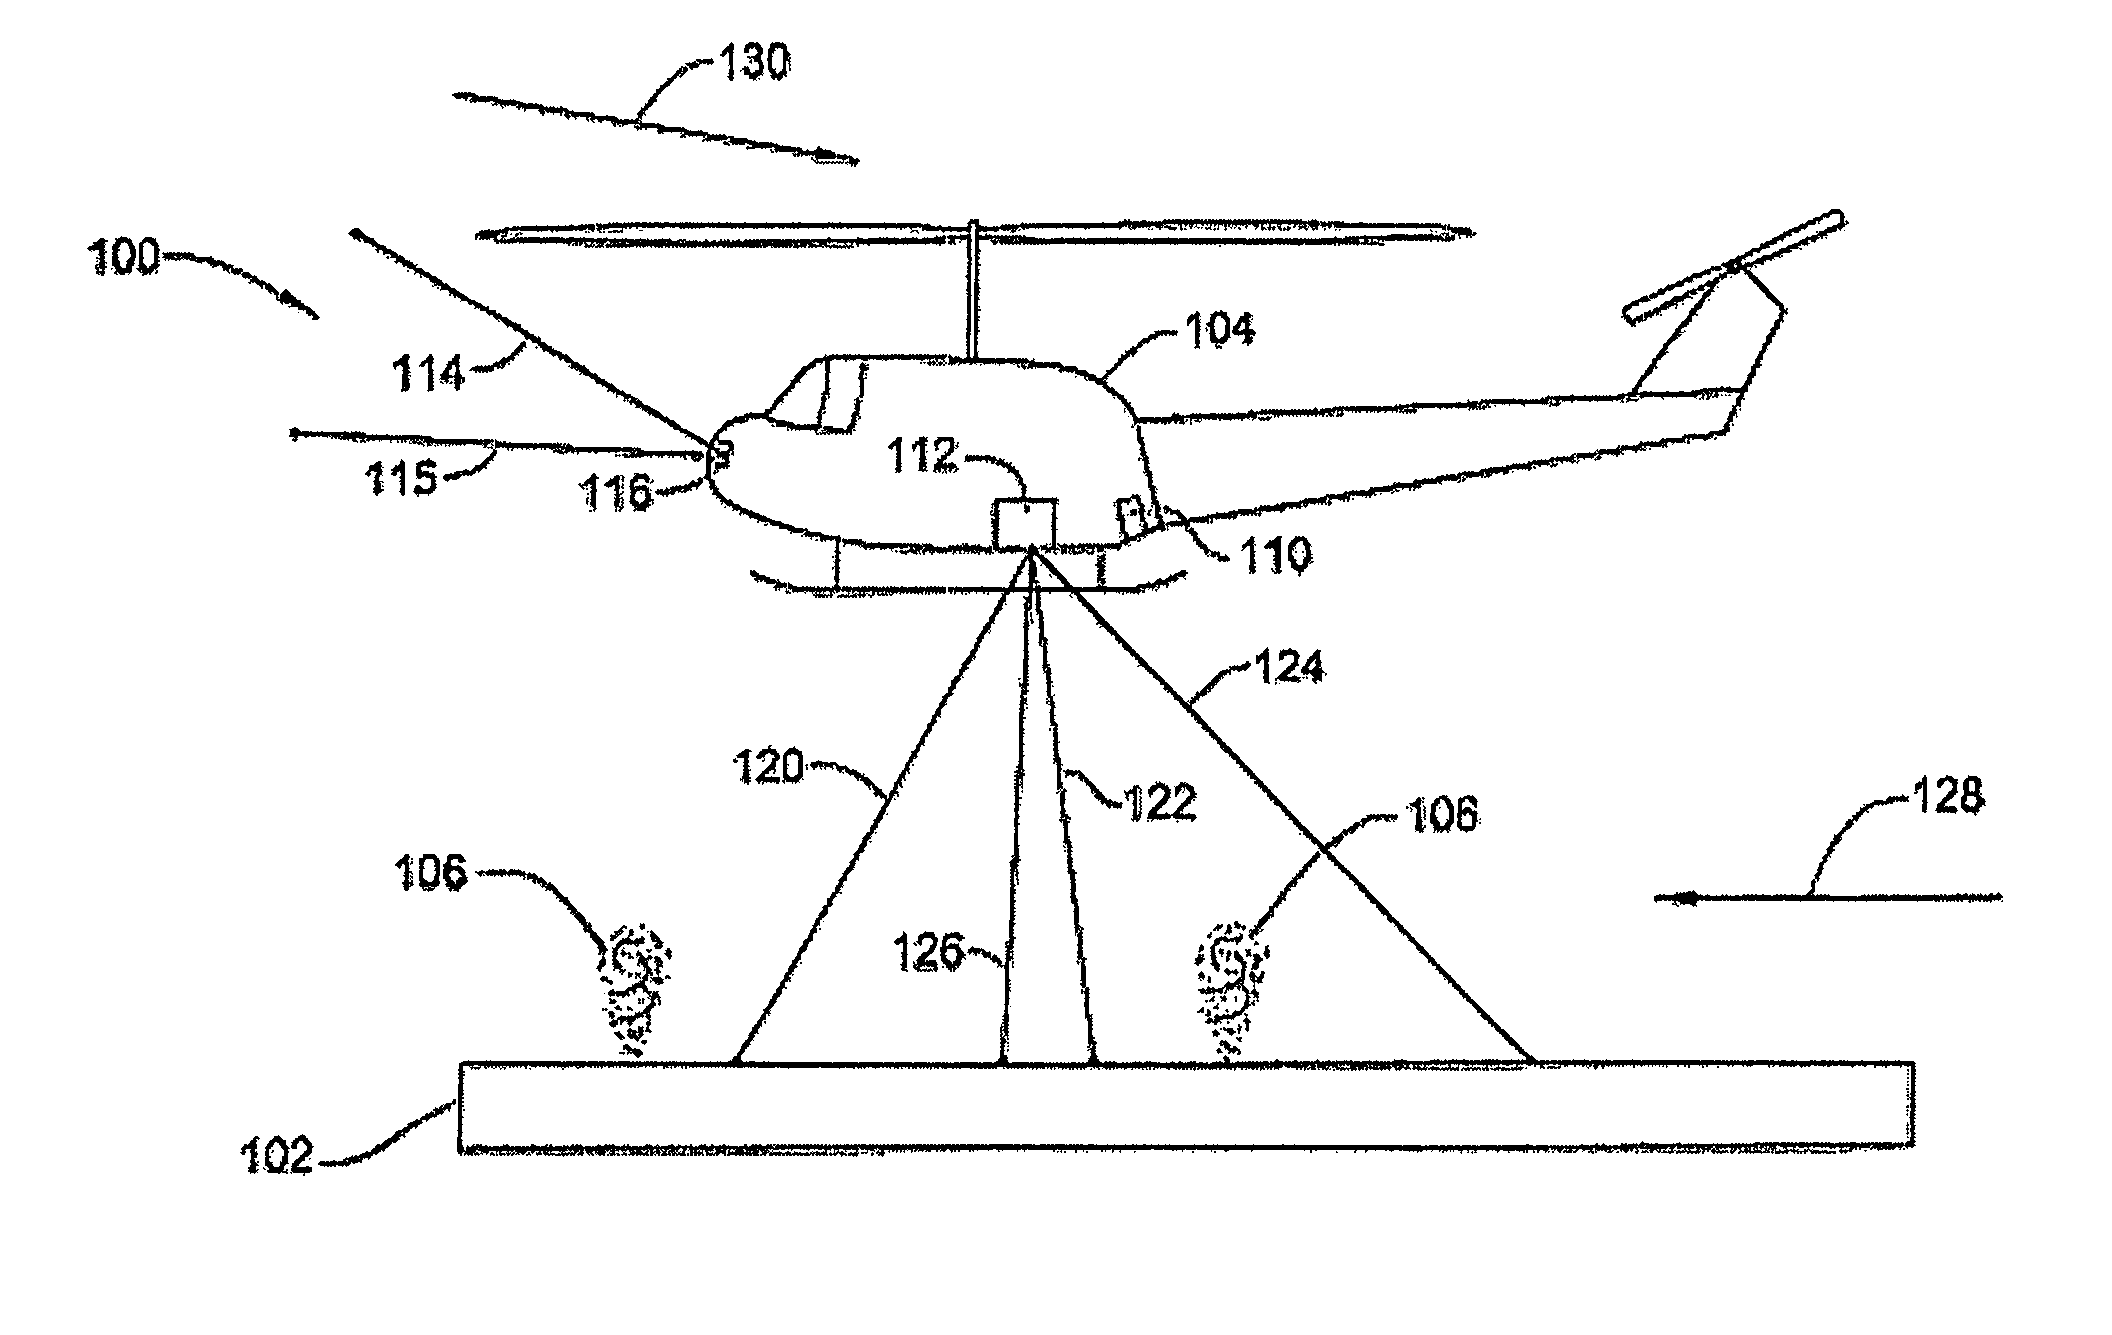 Optical system for detecting and displaying aircraft position and environment during landing and takeoff